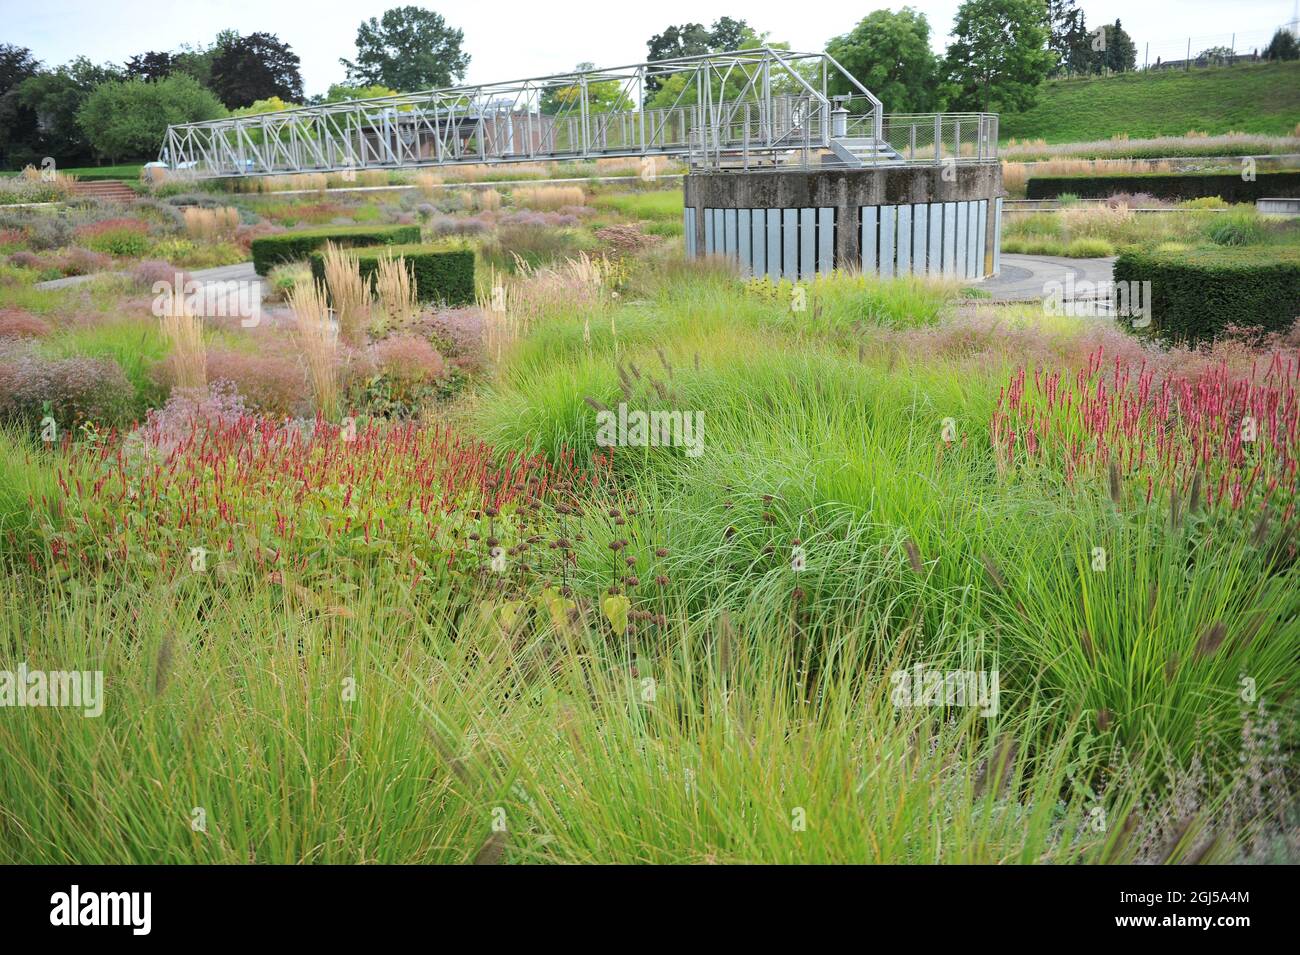 BOTTROP, GERMANY - 21 AUGUST 2021: Planting in perennial meadow style designed by Piet Oudolf in the public Berne Park Stock Photo